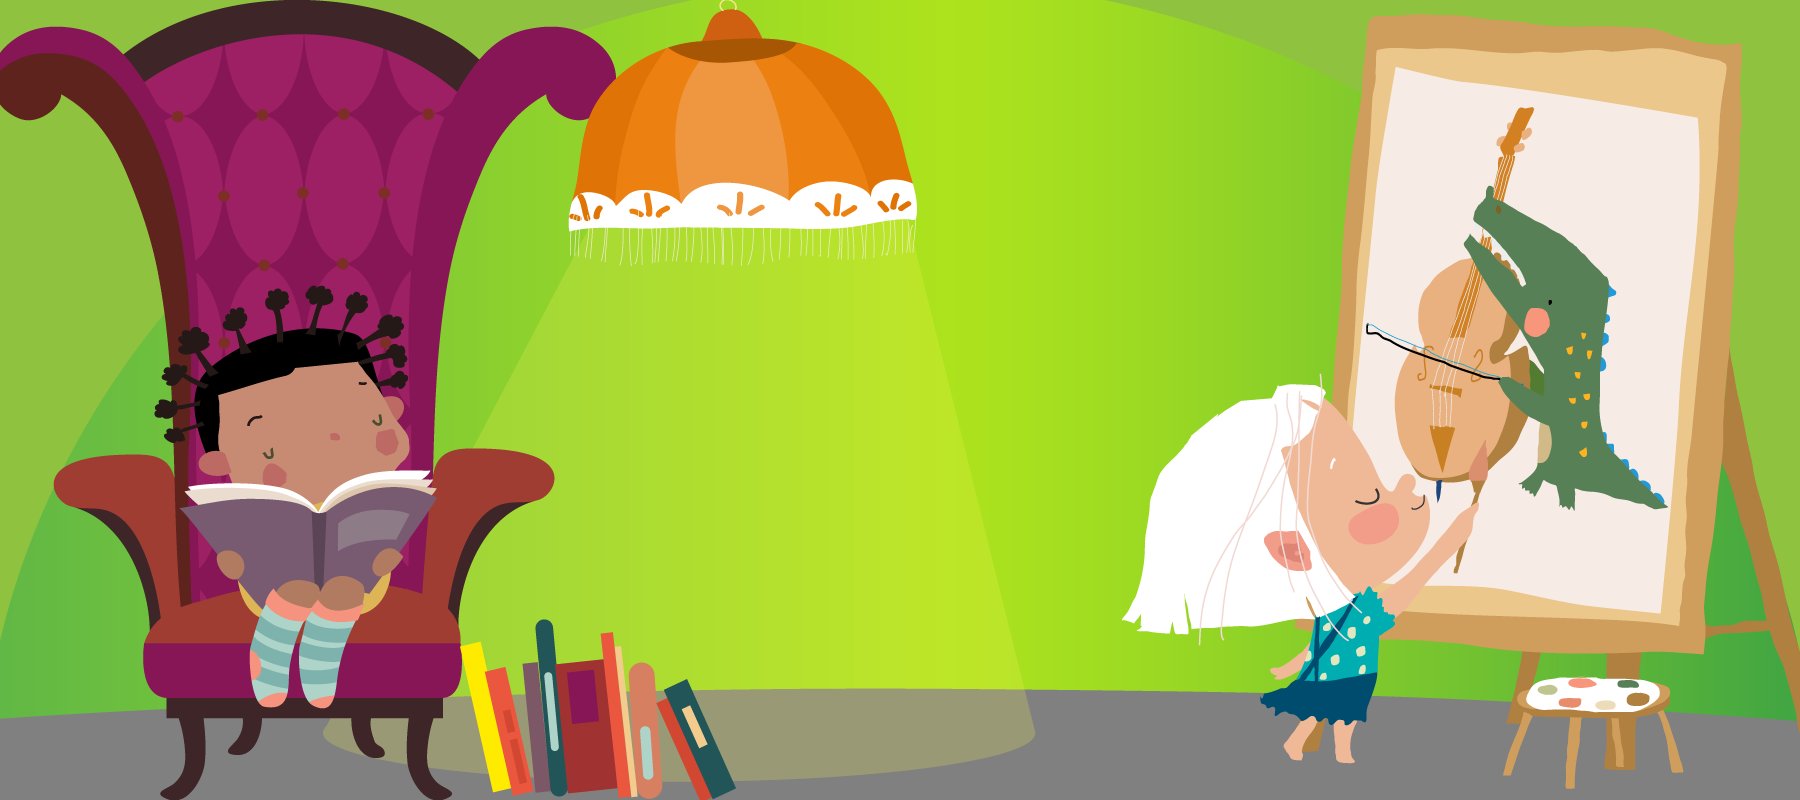 Illustration: on a green background, figure on right is painting a picture of an alligator playing upright bass, the figure on the left sits in a chair reading a book